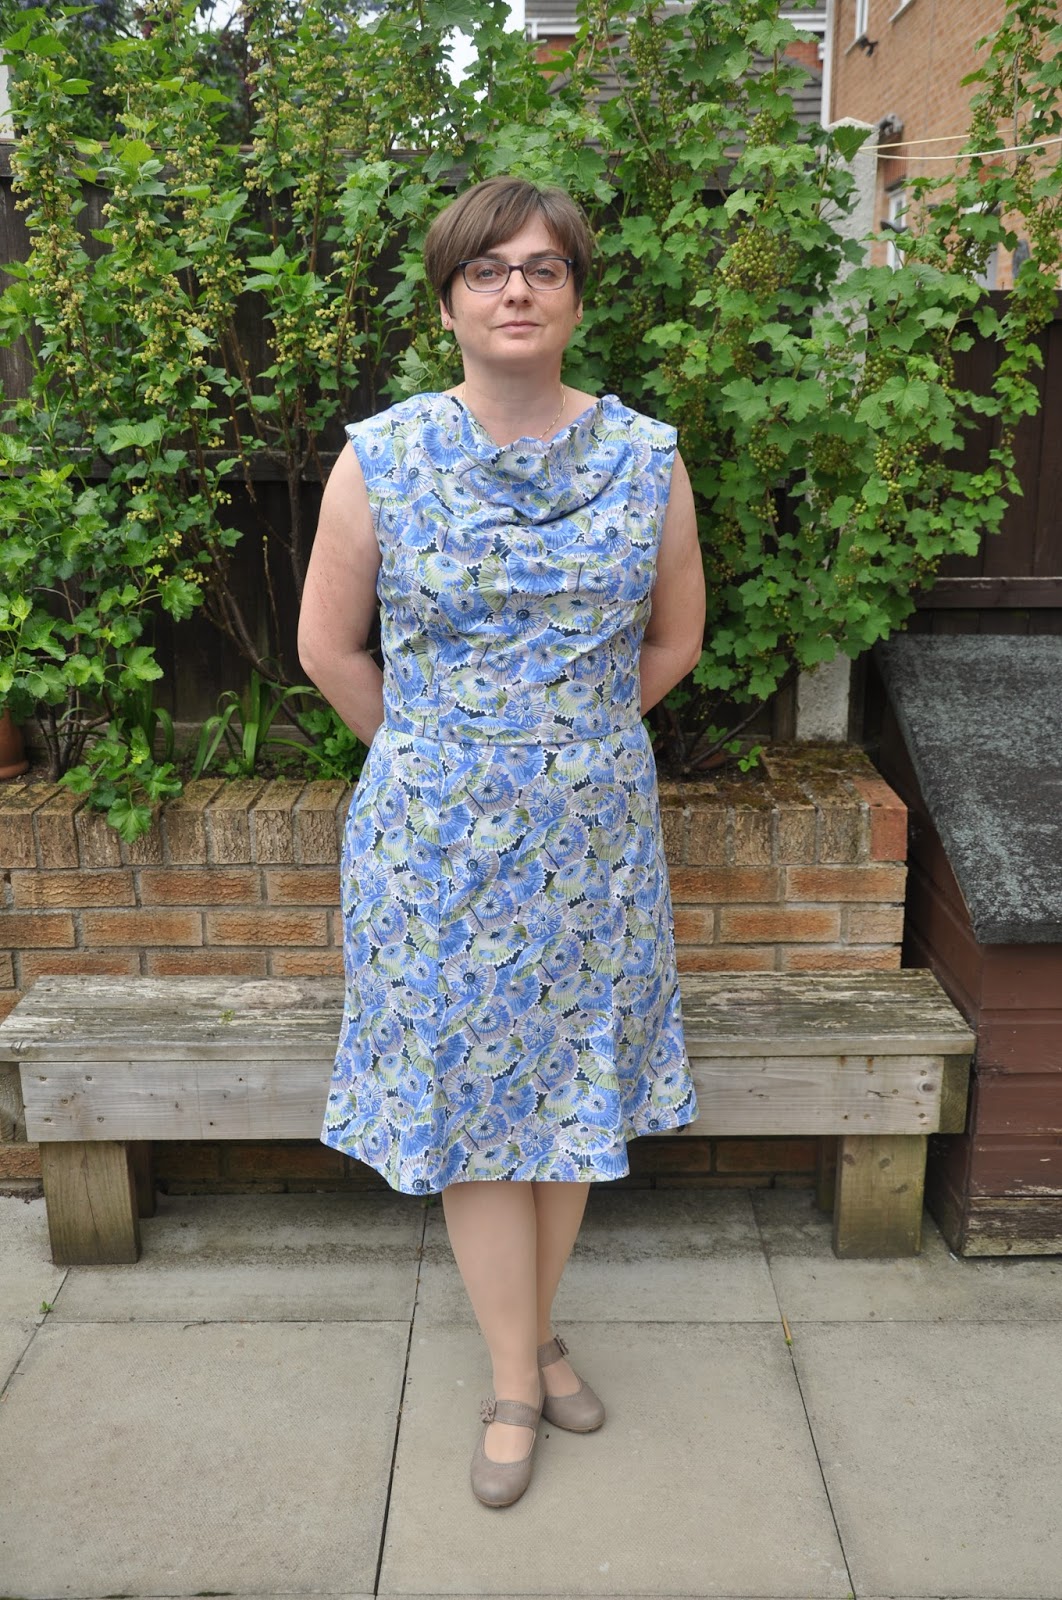 Claire's Sewcial Sewing: Cowl Neck Dress